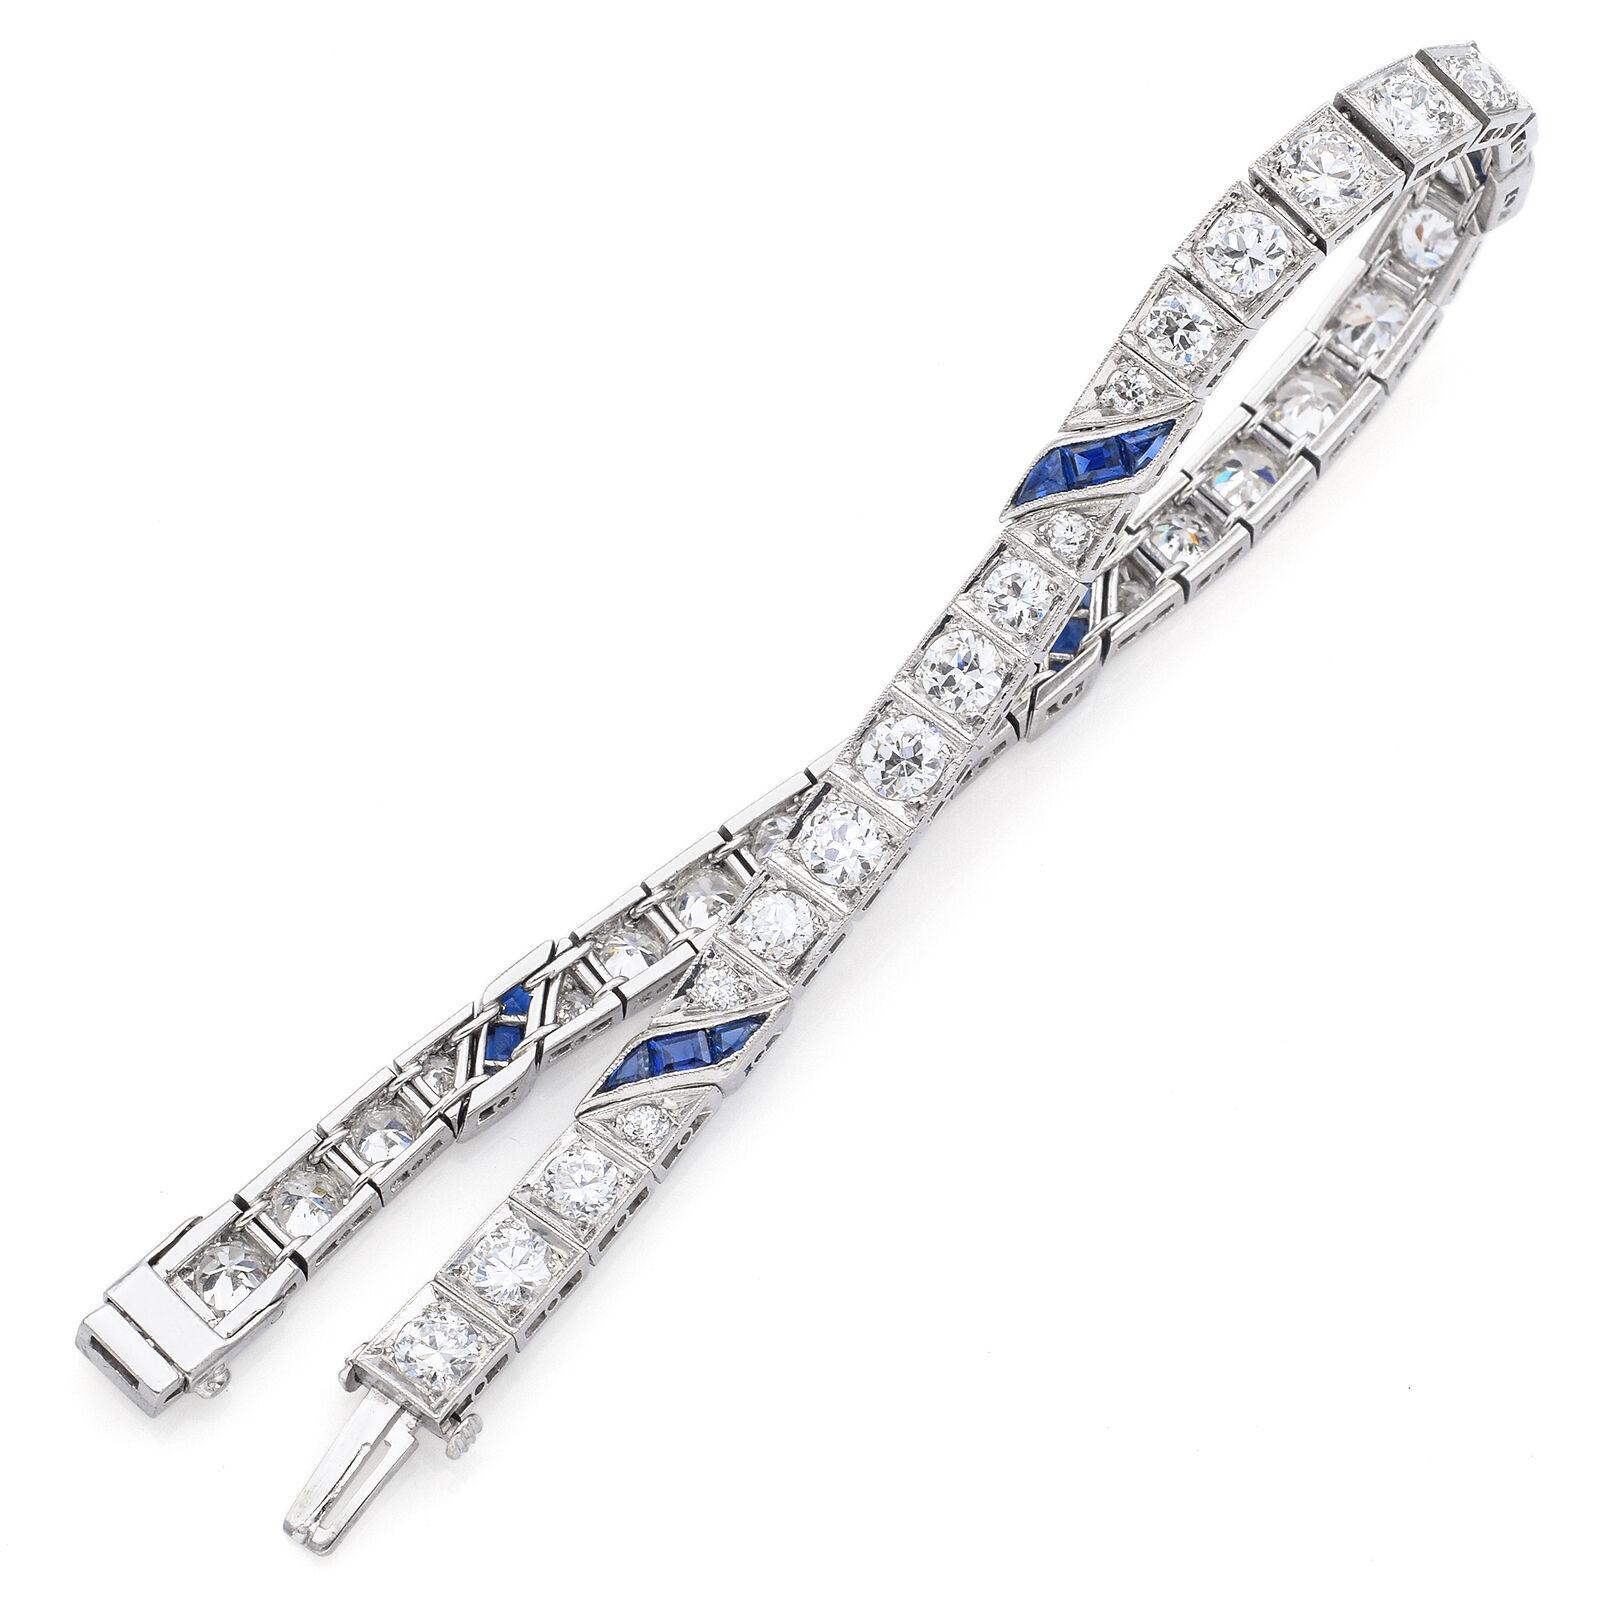 hairline scratch on one sapphire

Weight: 18.2 Grams
Stone: Sapphire (3 mm) & Approx 5.30 TCW (0.03-0.25 ct) I/J SI Old Euro Diamonds
Width: 5 mm
Bracelet Size: 6.75 Inches
Hallmark: Platinum Tested

ITEM #:BR-981-060823-14